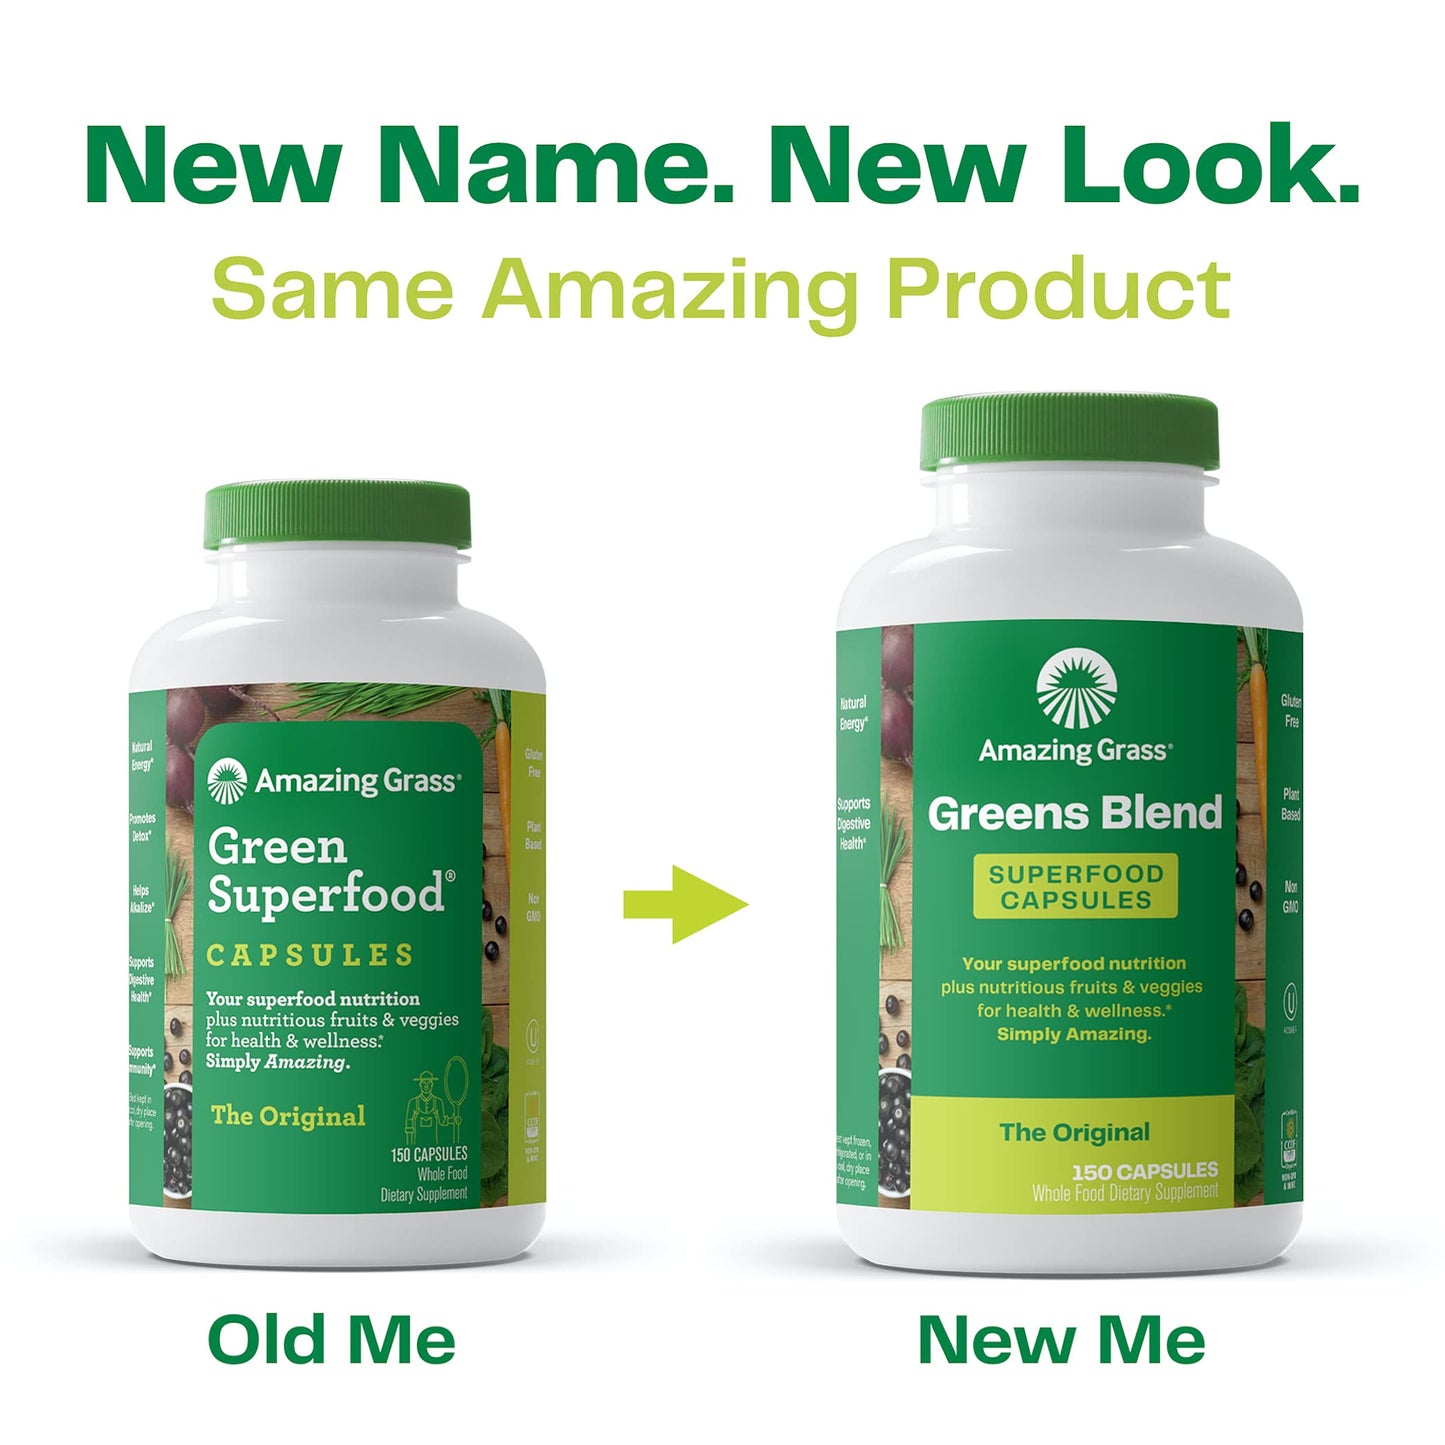 Amazing Grass Greens Blend Superfood 150 Capsules